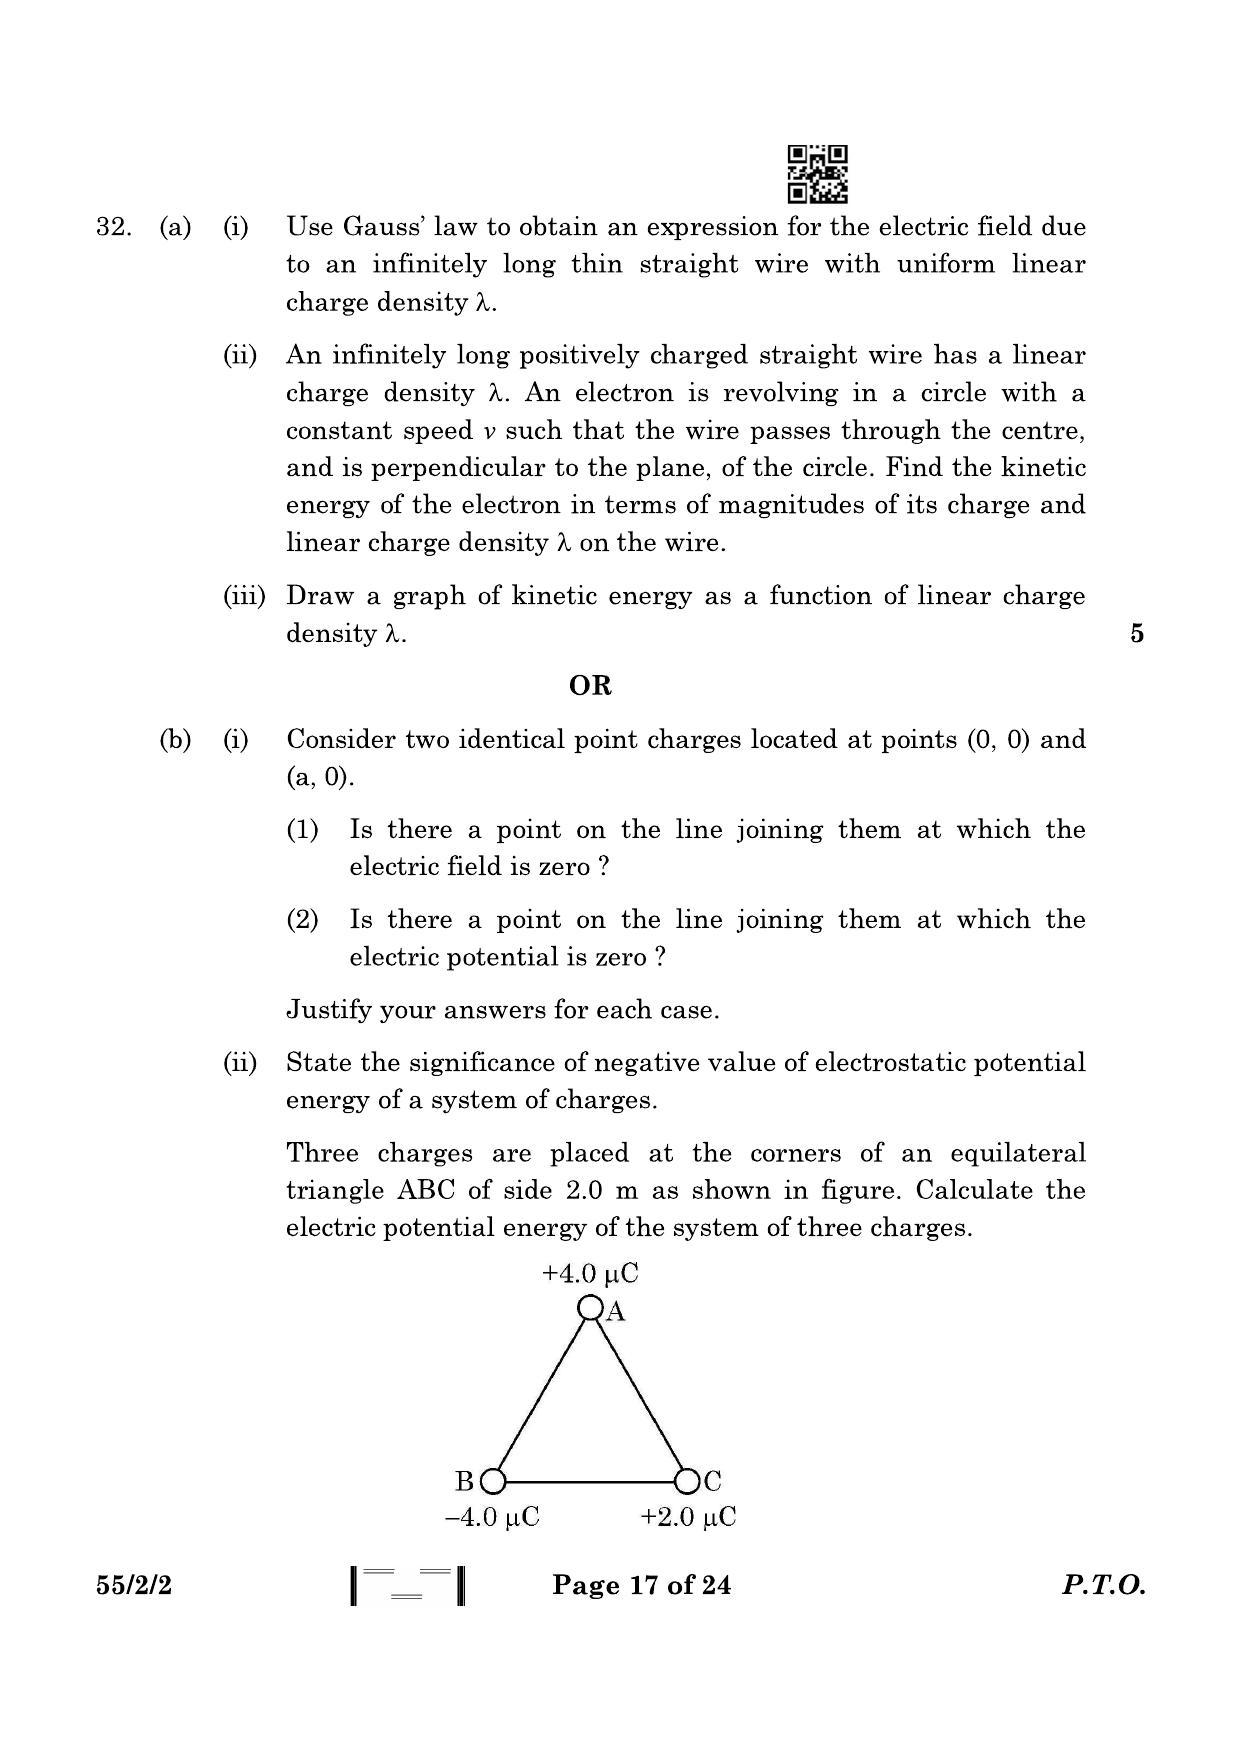 CBSE Class 12 55-2-2 Physics 2023 Question Paper - Page 17